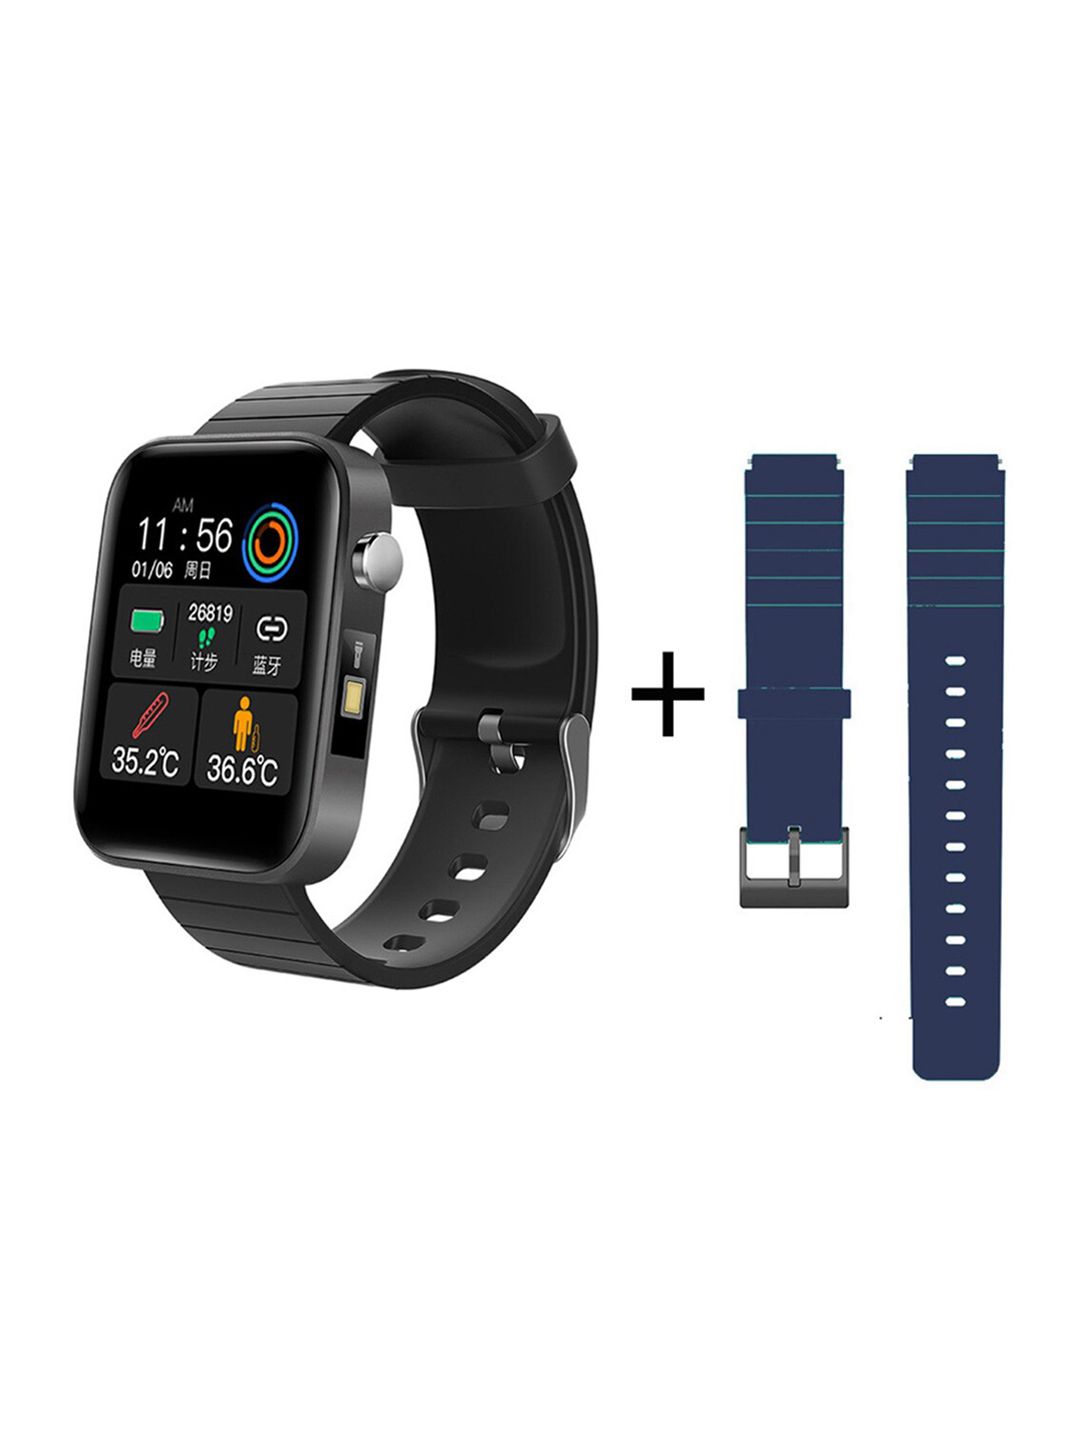 EYNK Unisex Black & Navy Blue LitFit T68 Full Touch Display Fitness Tracker Smart Watch Price in India